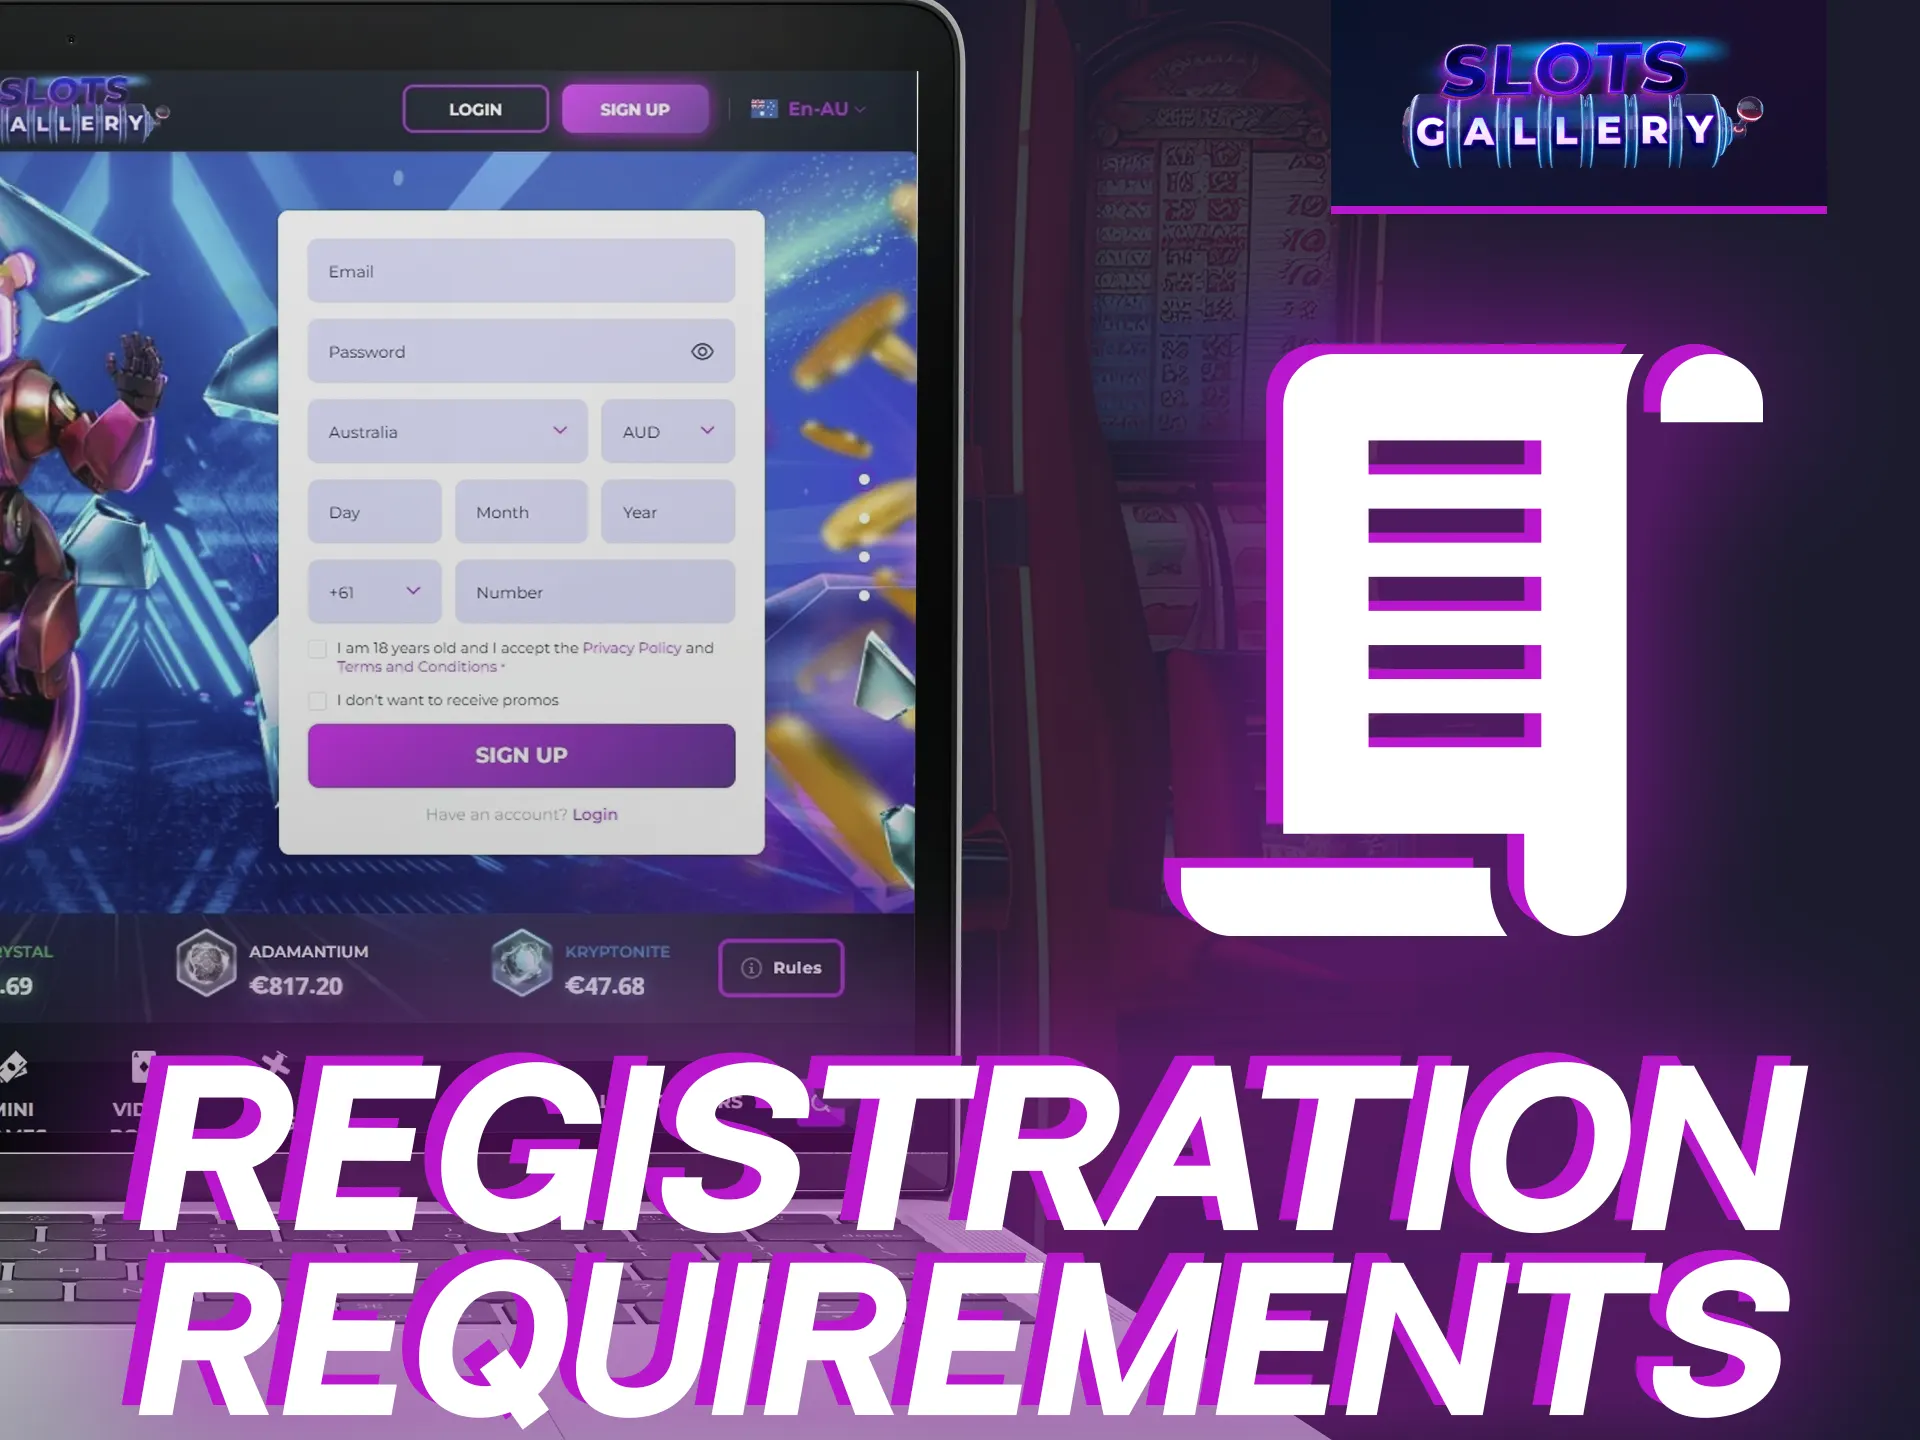 There is a registration requirements for a Slots Gallery website.